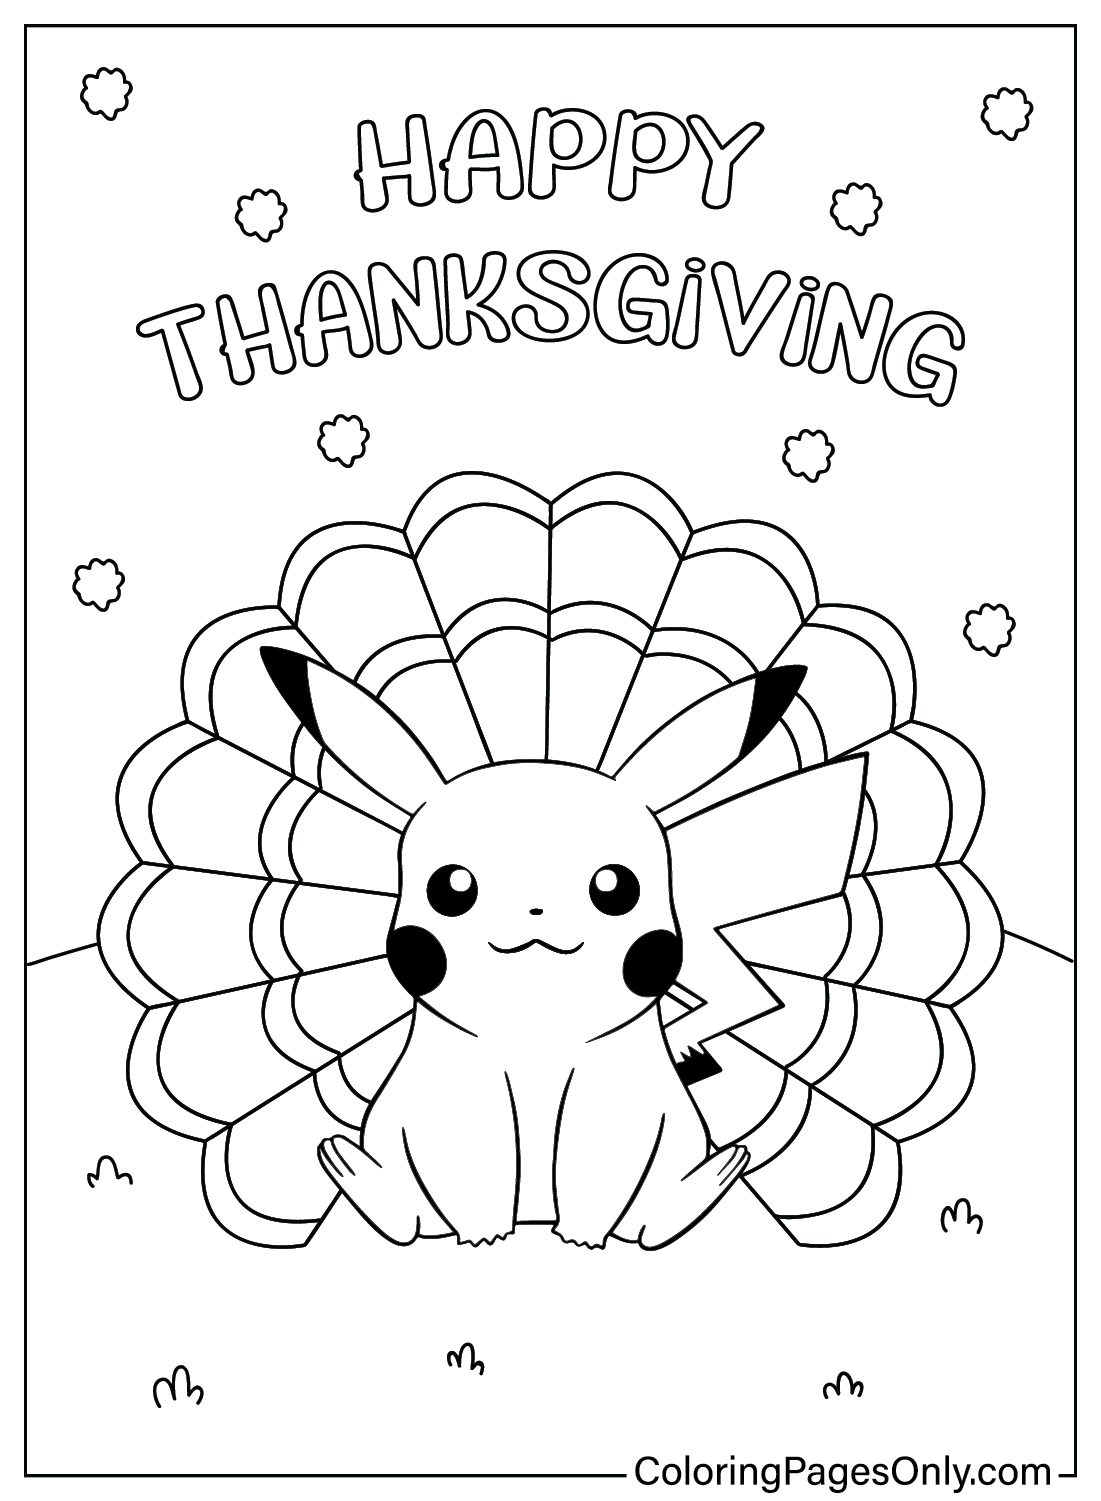 Thanksgiving Pikachu Coloring Page from Thanksgiving Cartoon